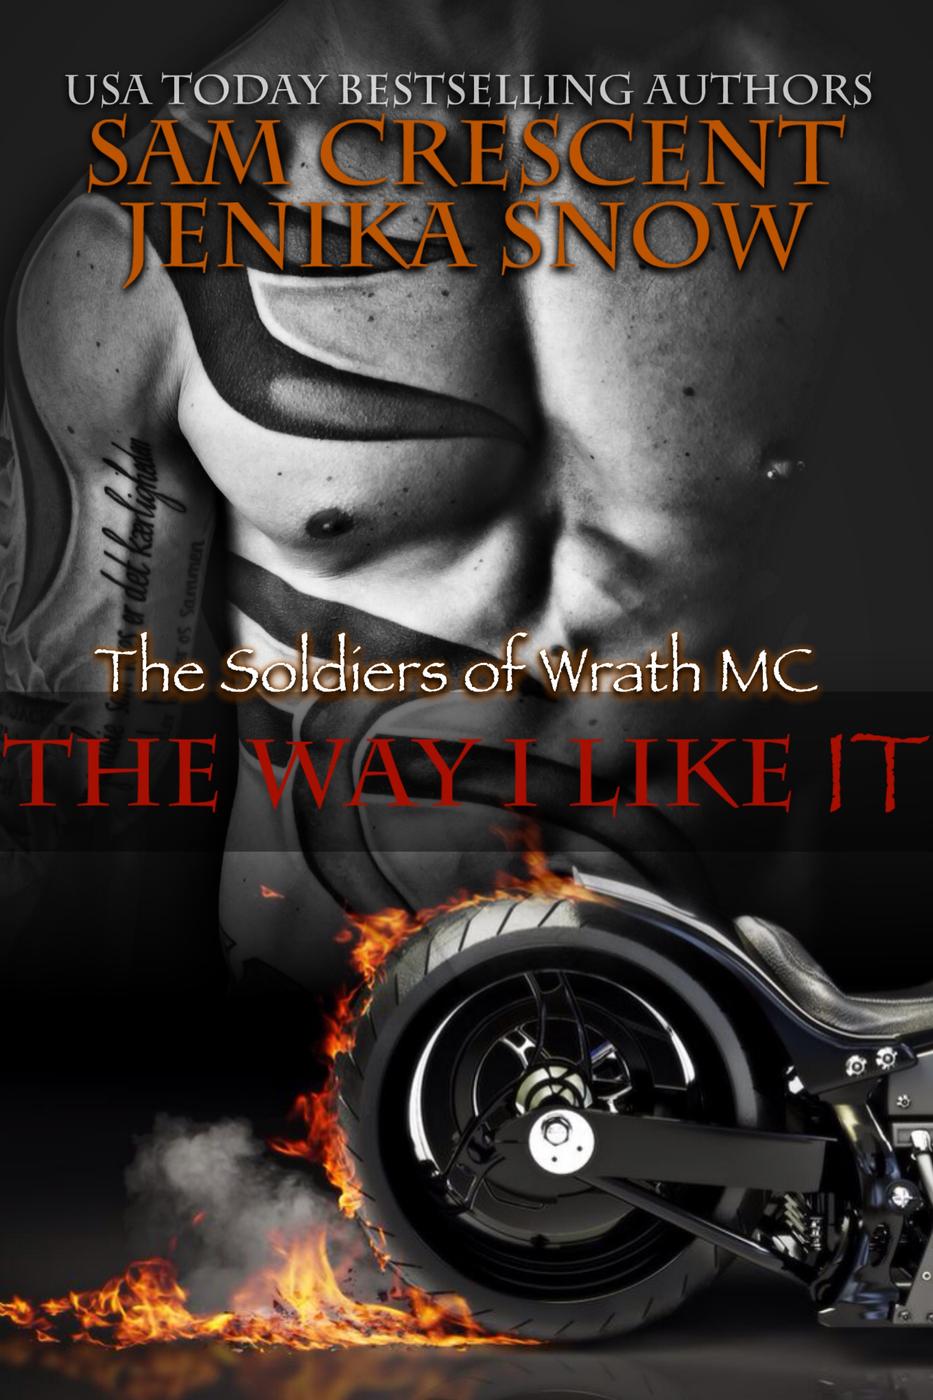 The Way I Like It (The Soldiers of Wrath MC, #5) (2015) by Jenika Snow